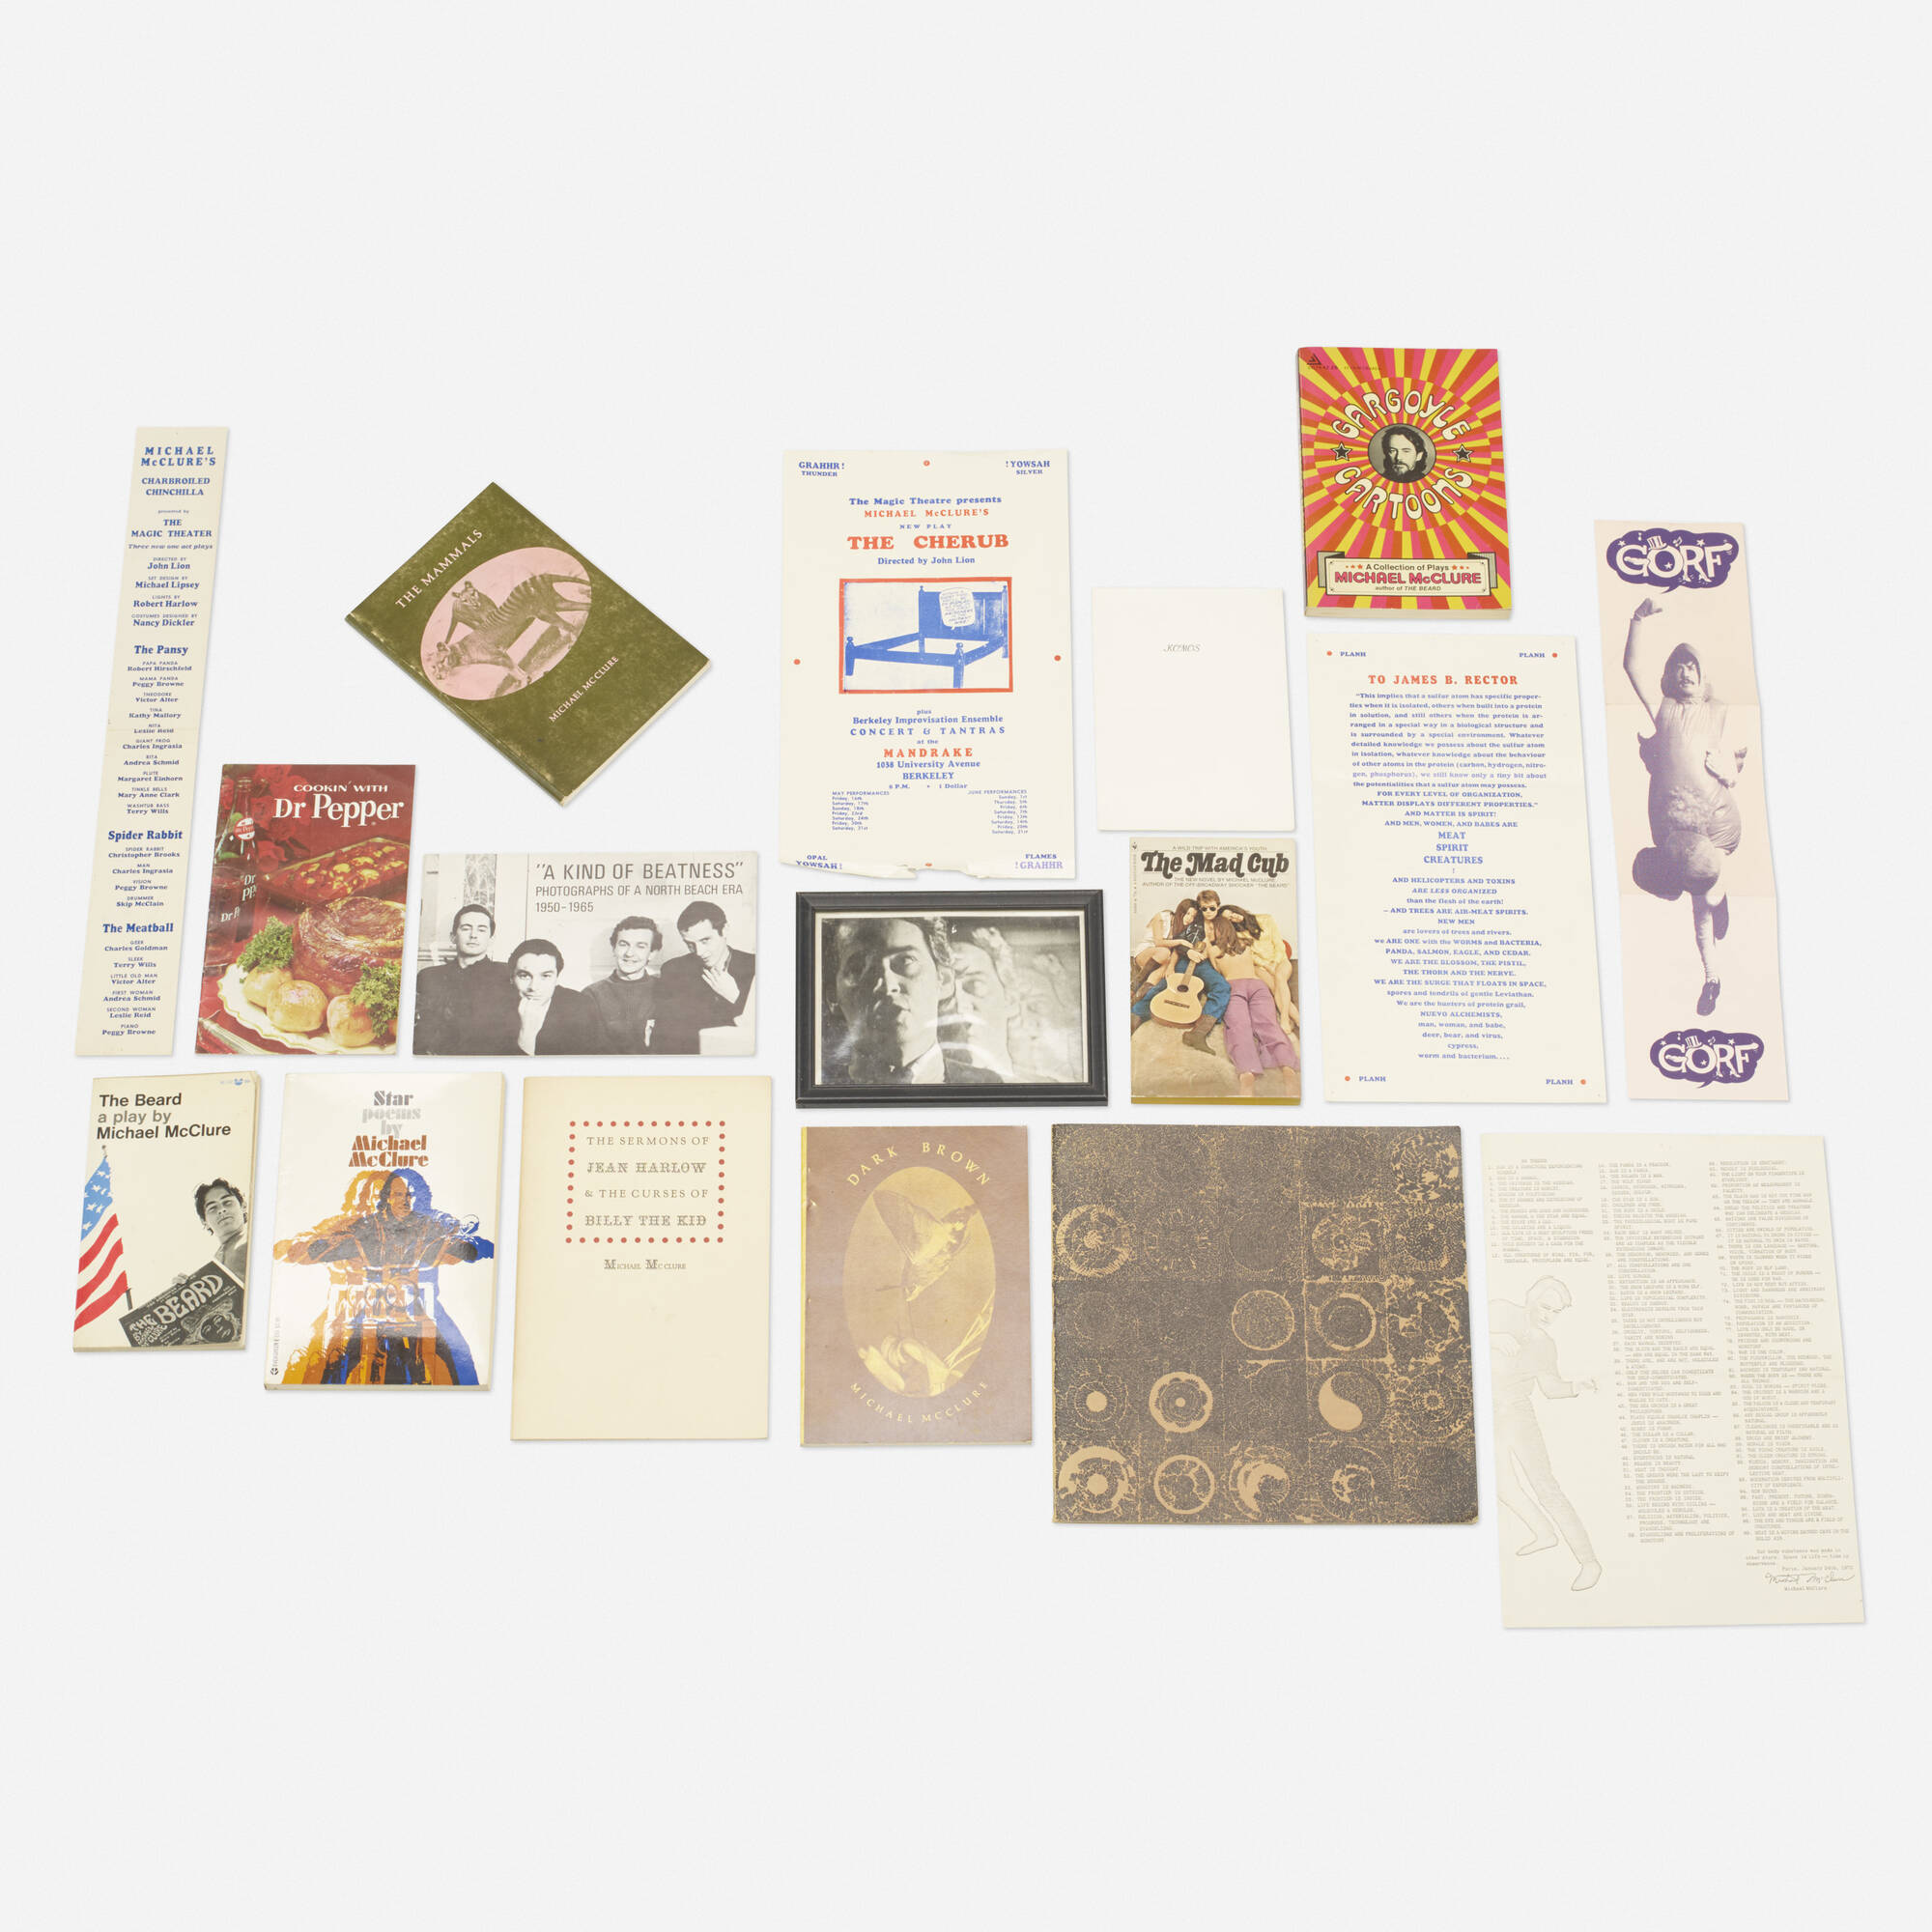 525 MICHAEL MCCLURE, collection of books and ephemera